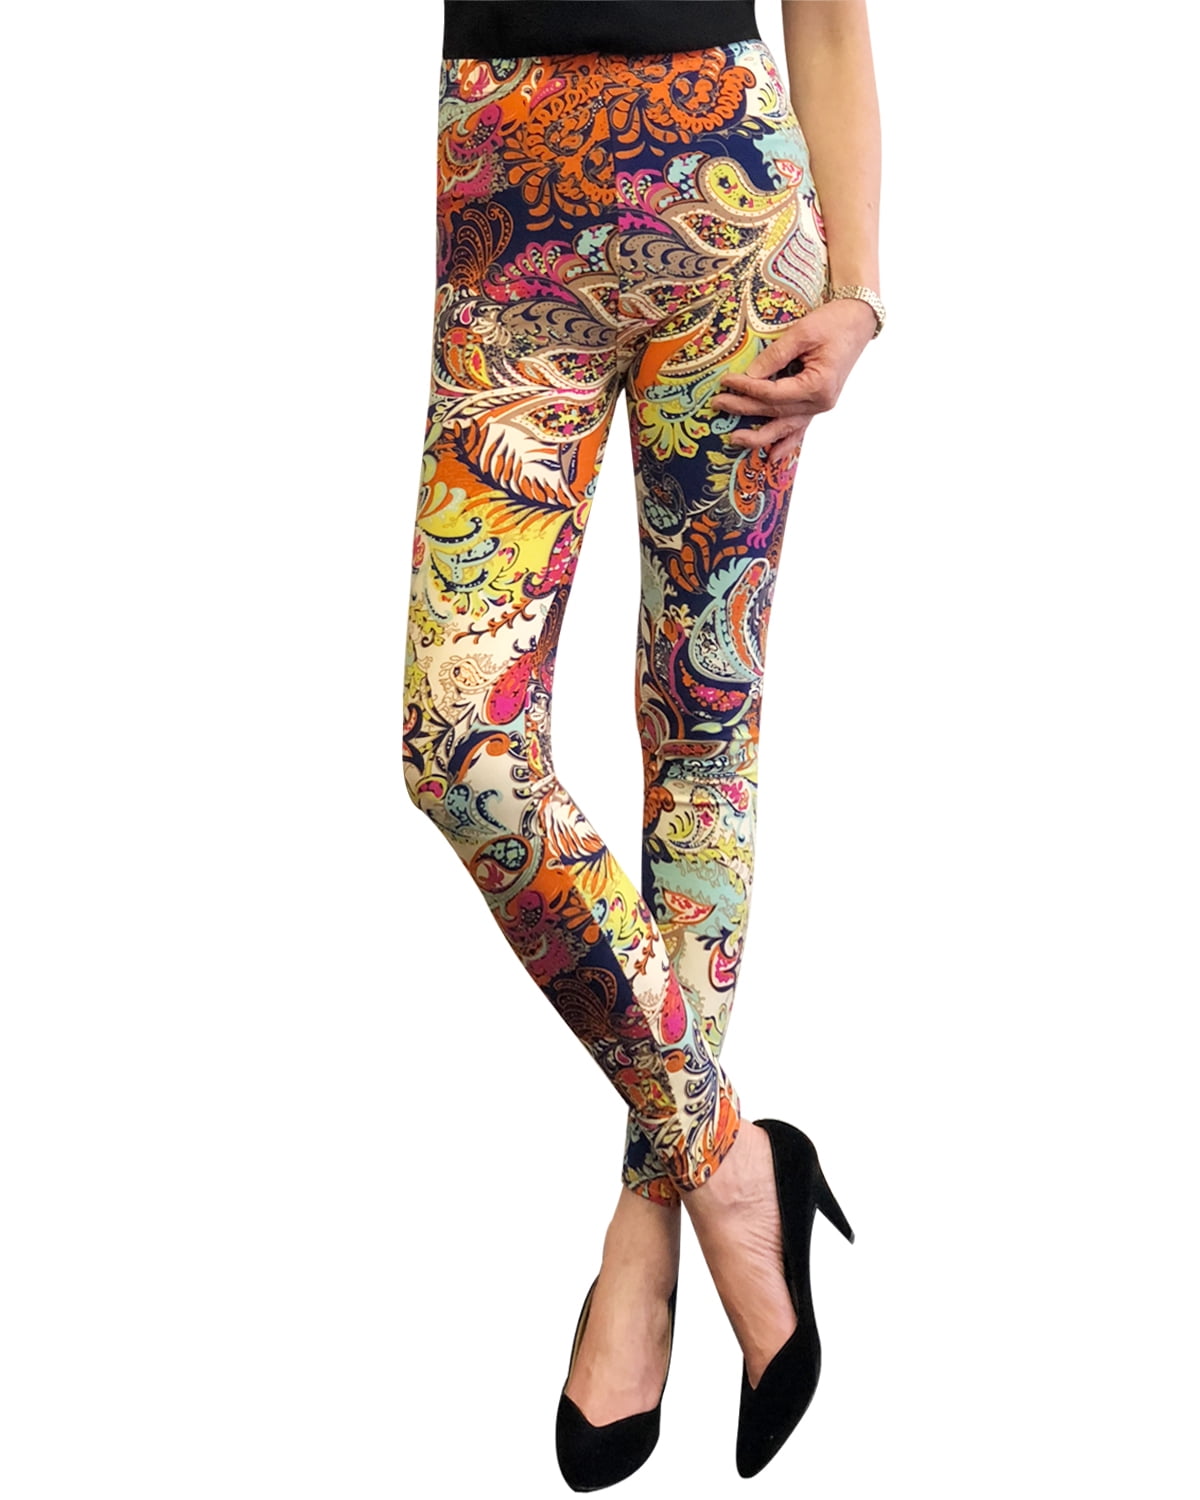 Wrapables Women’s Ultra-Soft and Stretchy Printed Leggings for Activewear and Workout